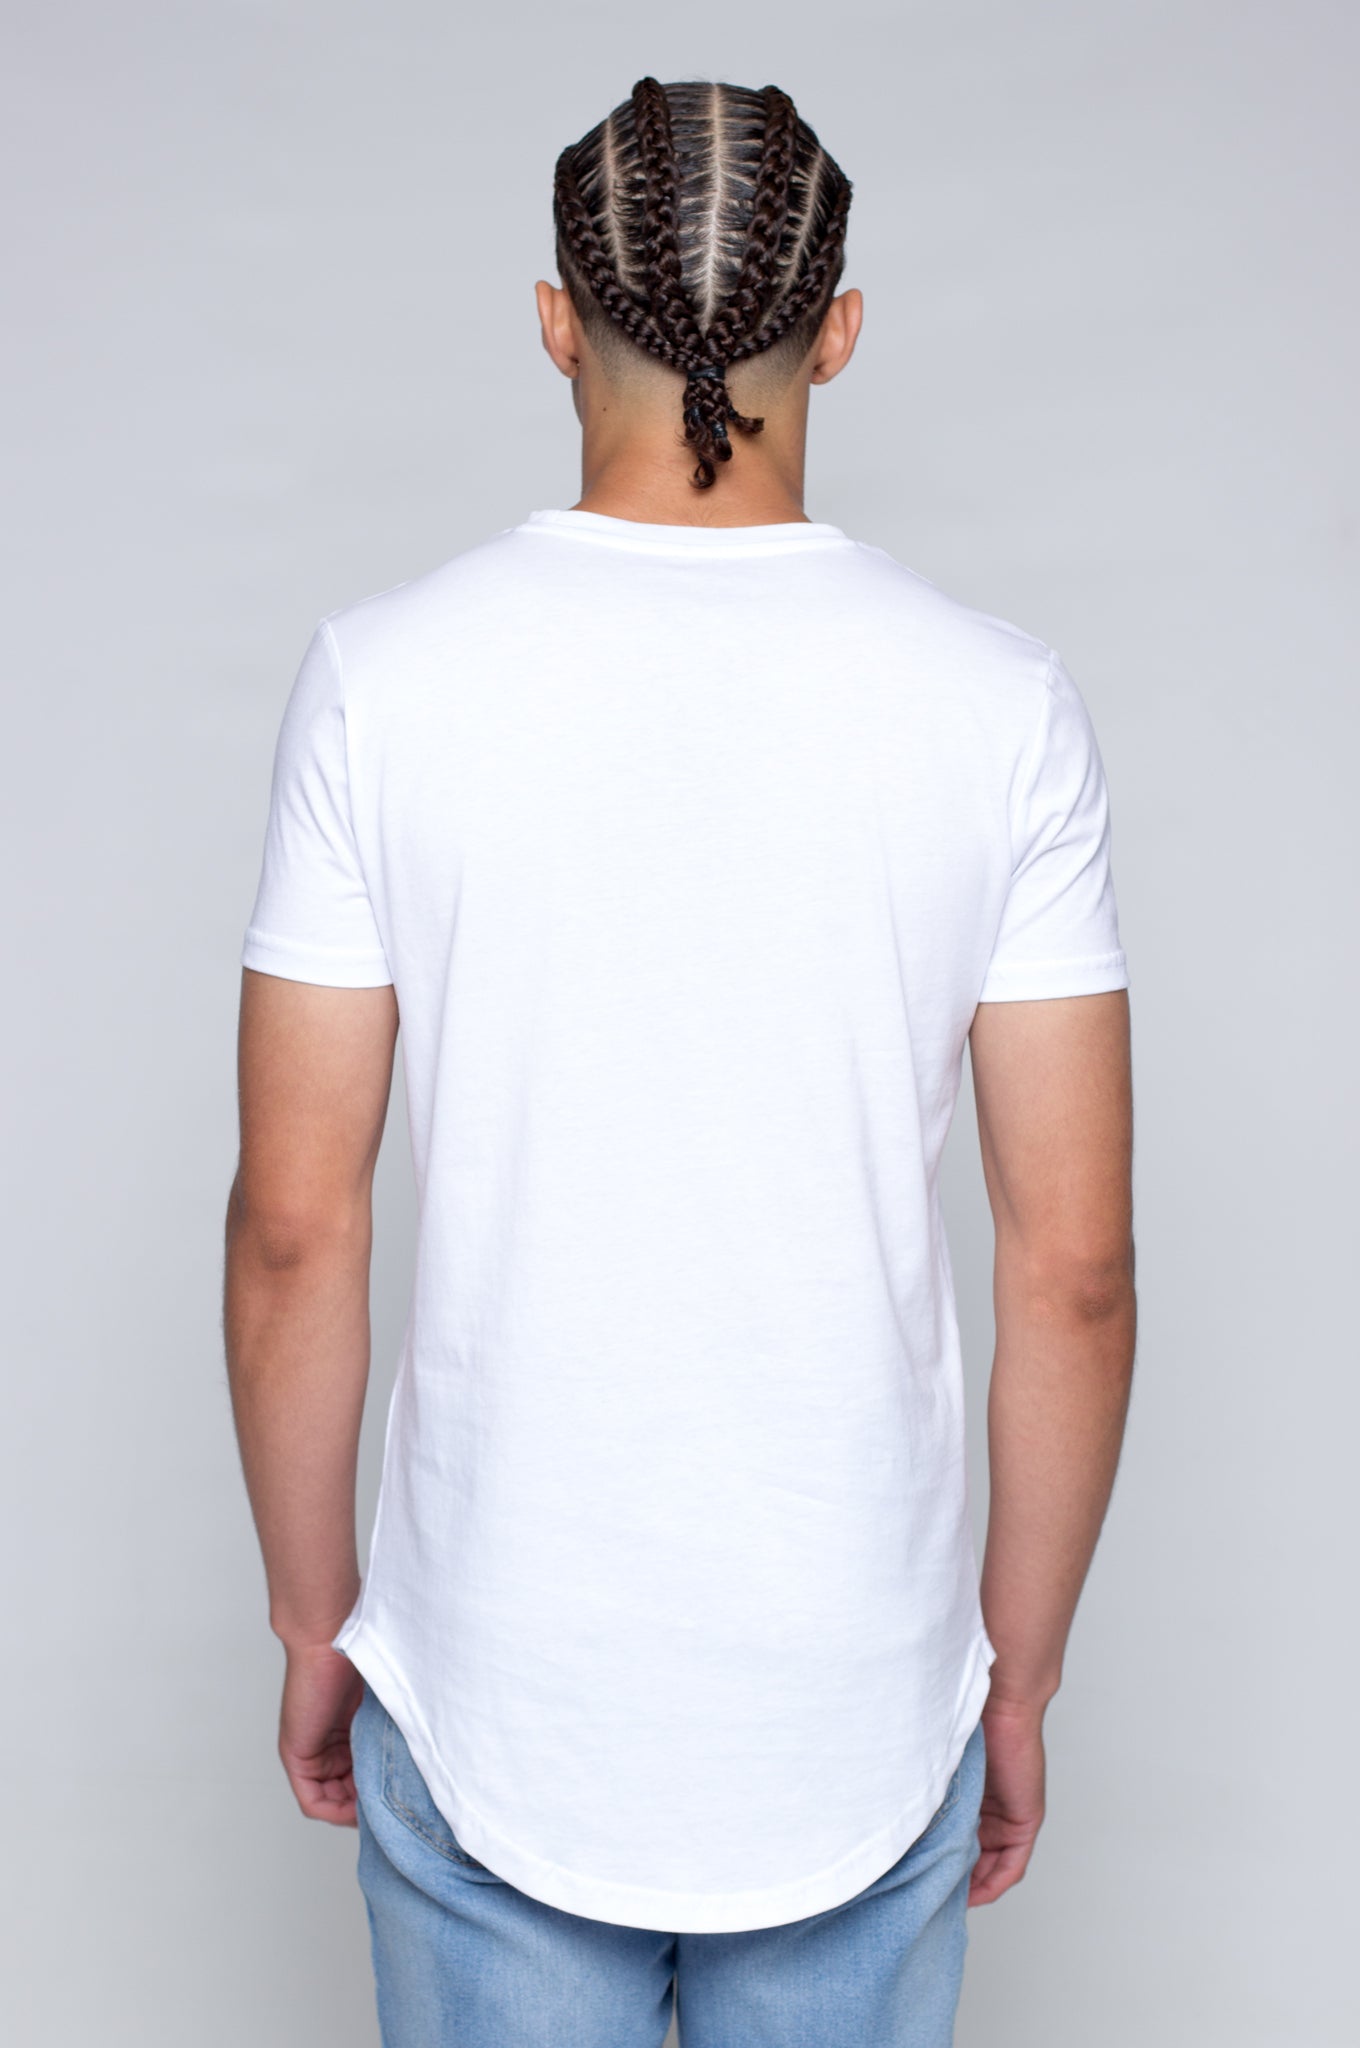 Scallop-Cut T-Shirt in White | Poor Little Rich Boy Clothing